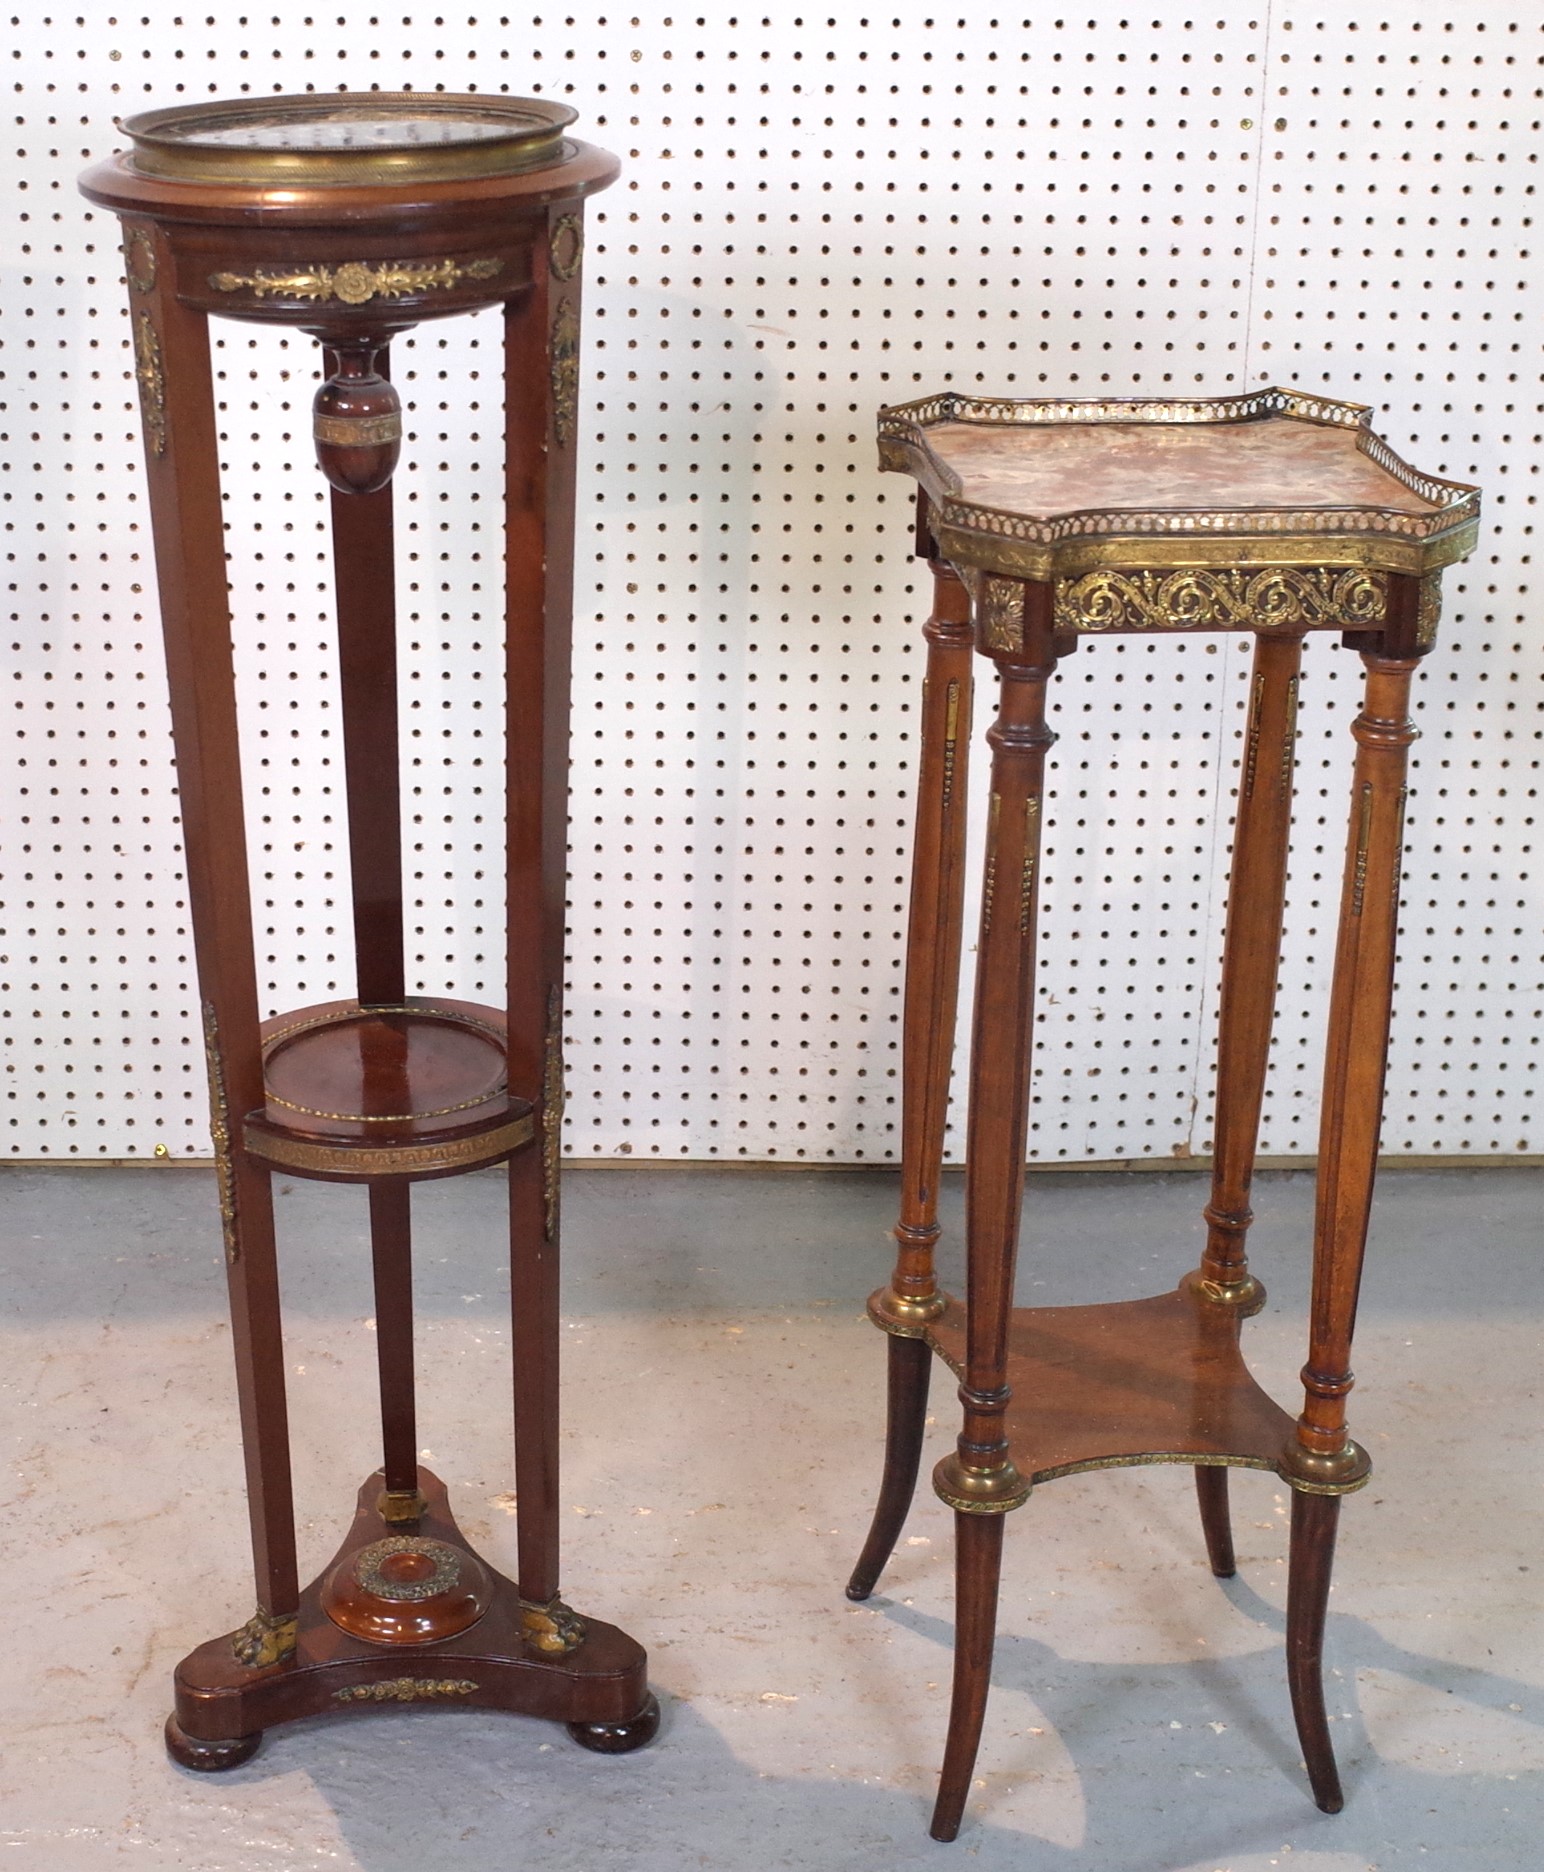 A FRENCH EMPIRE STYLE GILT METAL MOUNTED MAHOGANY AND MARBLE CIRCULAR TWO TIER STAND (2)